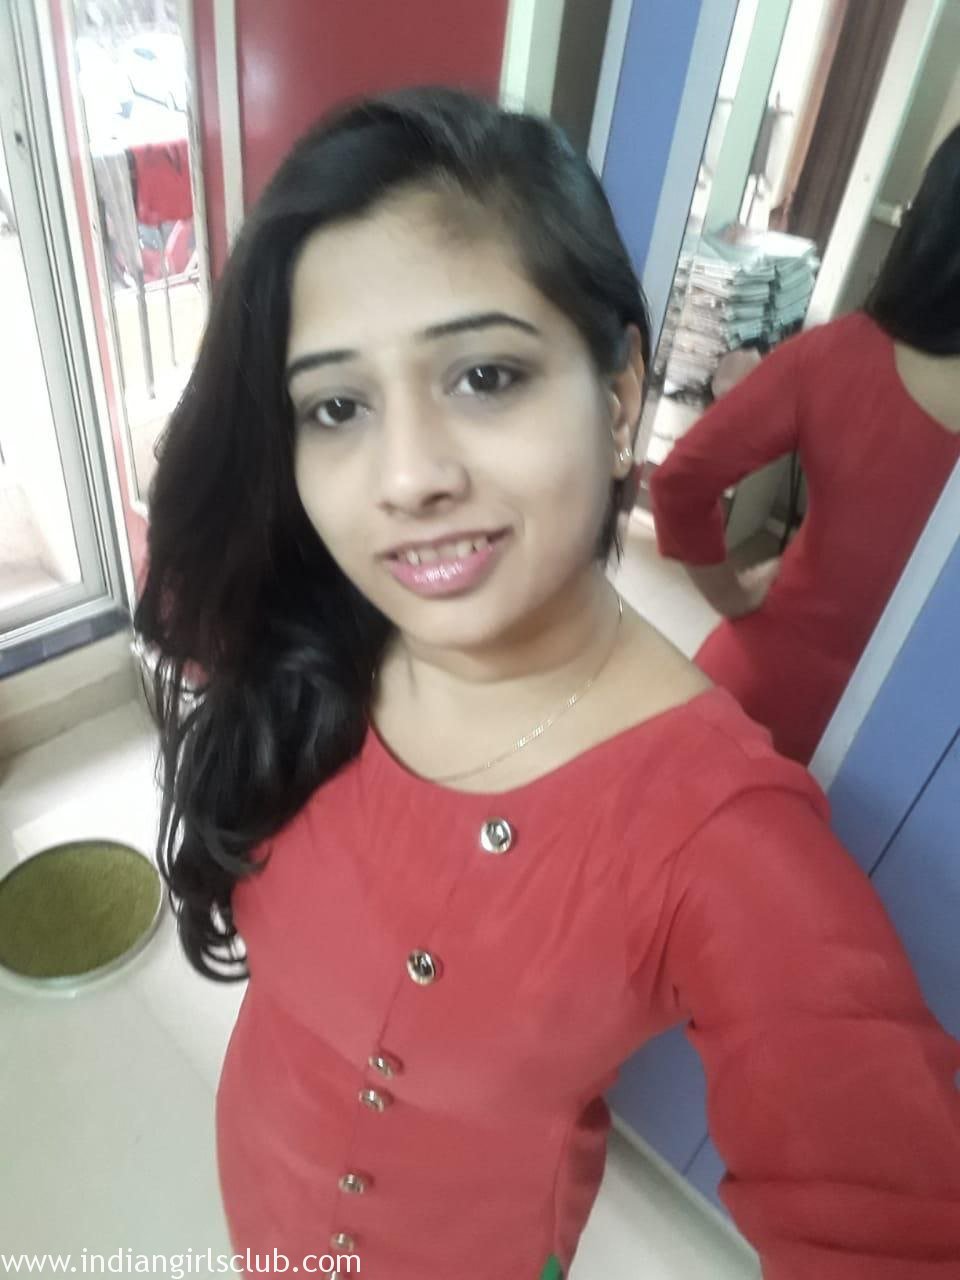 Indian Lady Teacher Nude Images - Indian School Teacher Sex Super Sexy Hot Nudes - Indian Girls Club